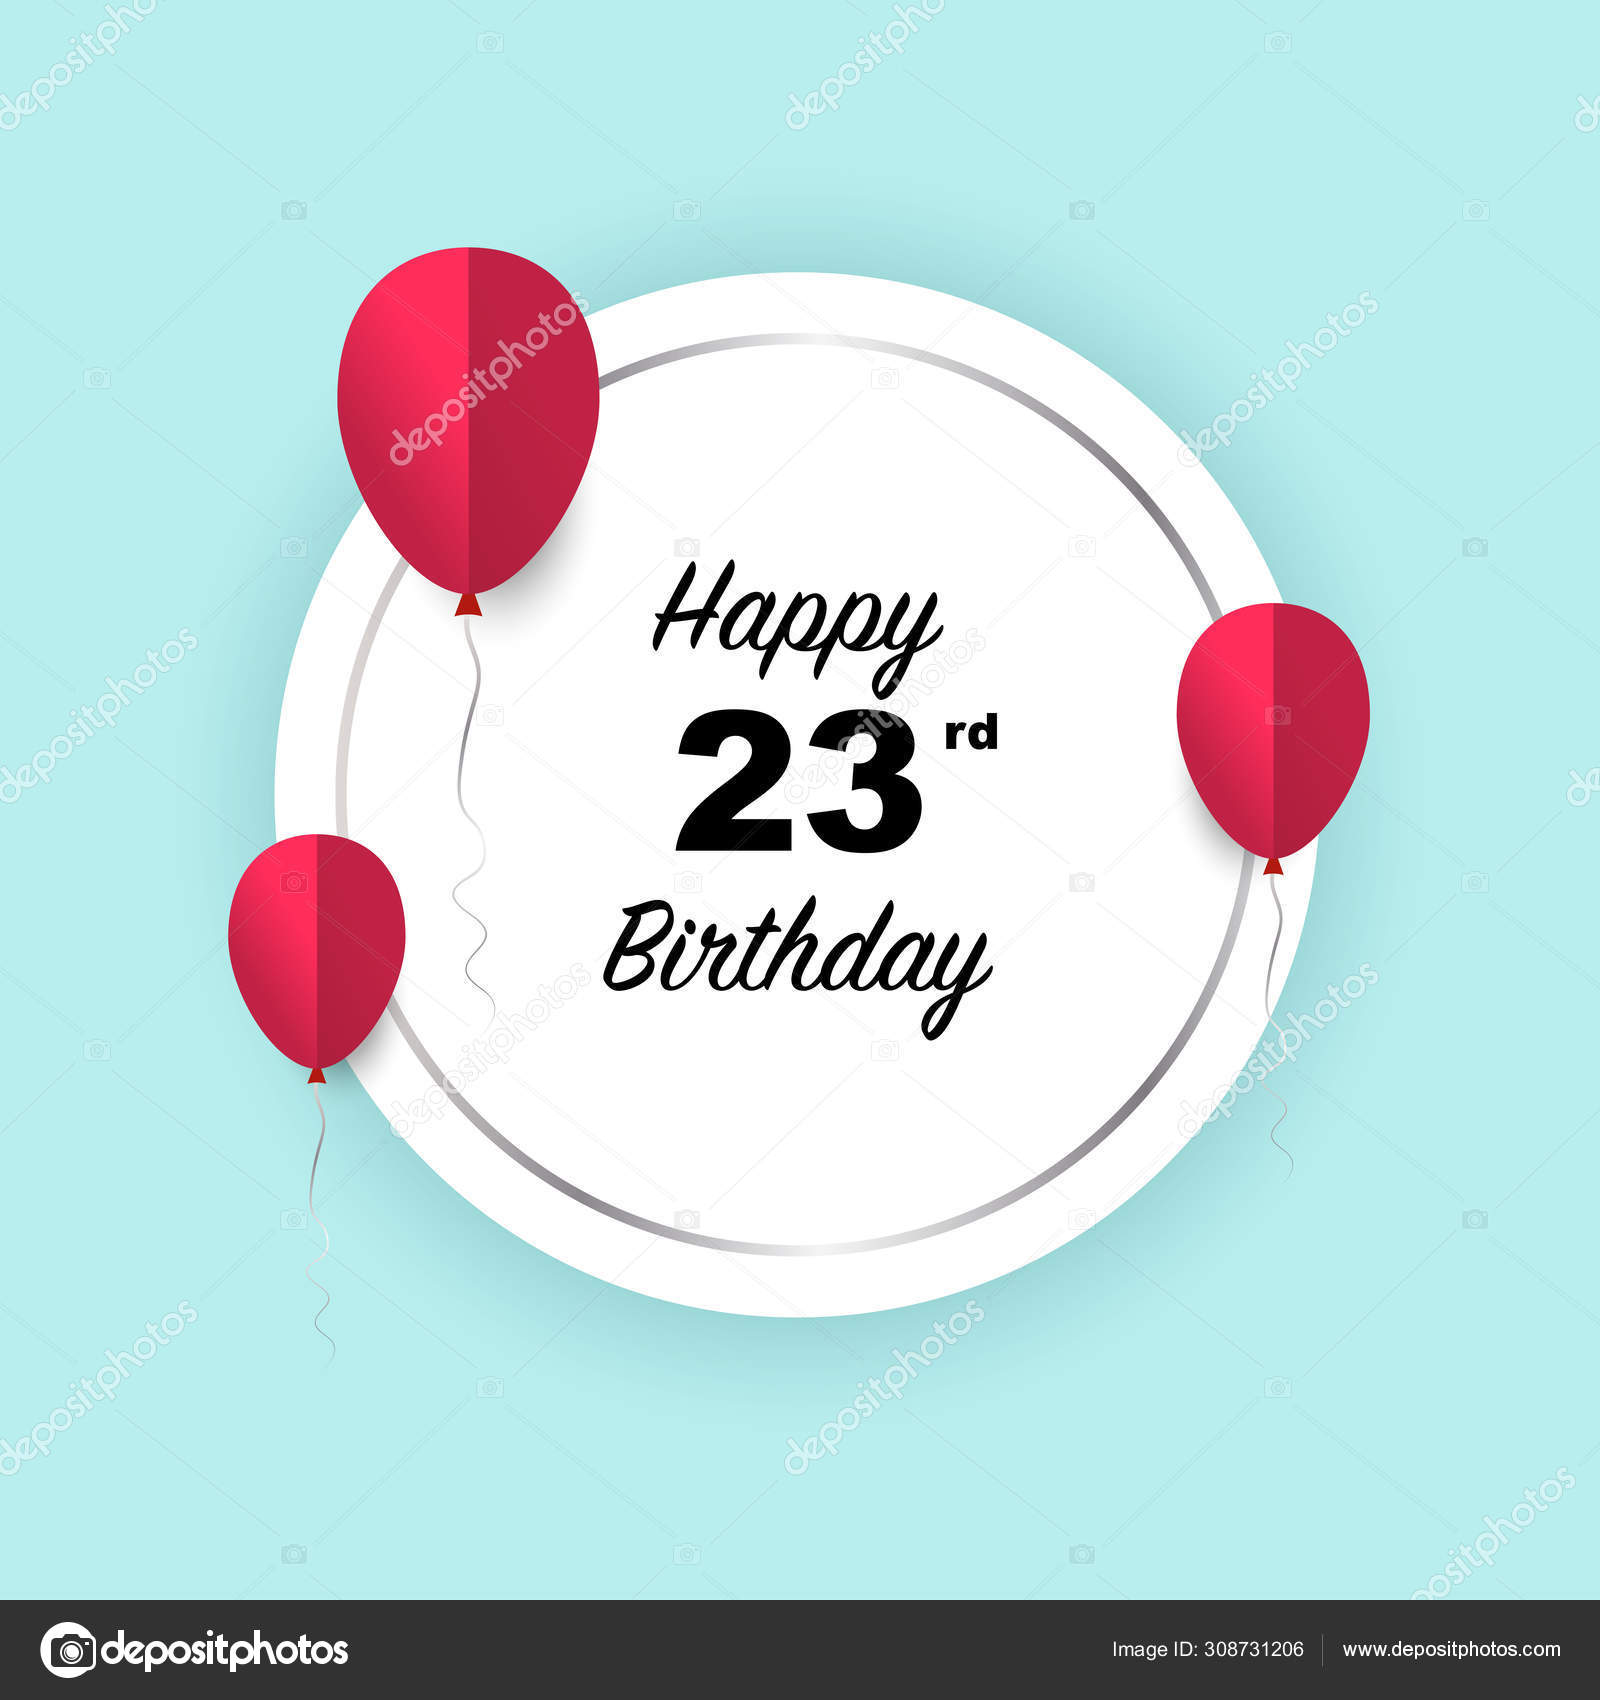 127 Happy 23rd Birthday Vector Images Free Royalty Free Happy 23rd Birthday Vectors Depositphotos